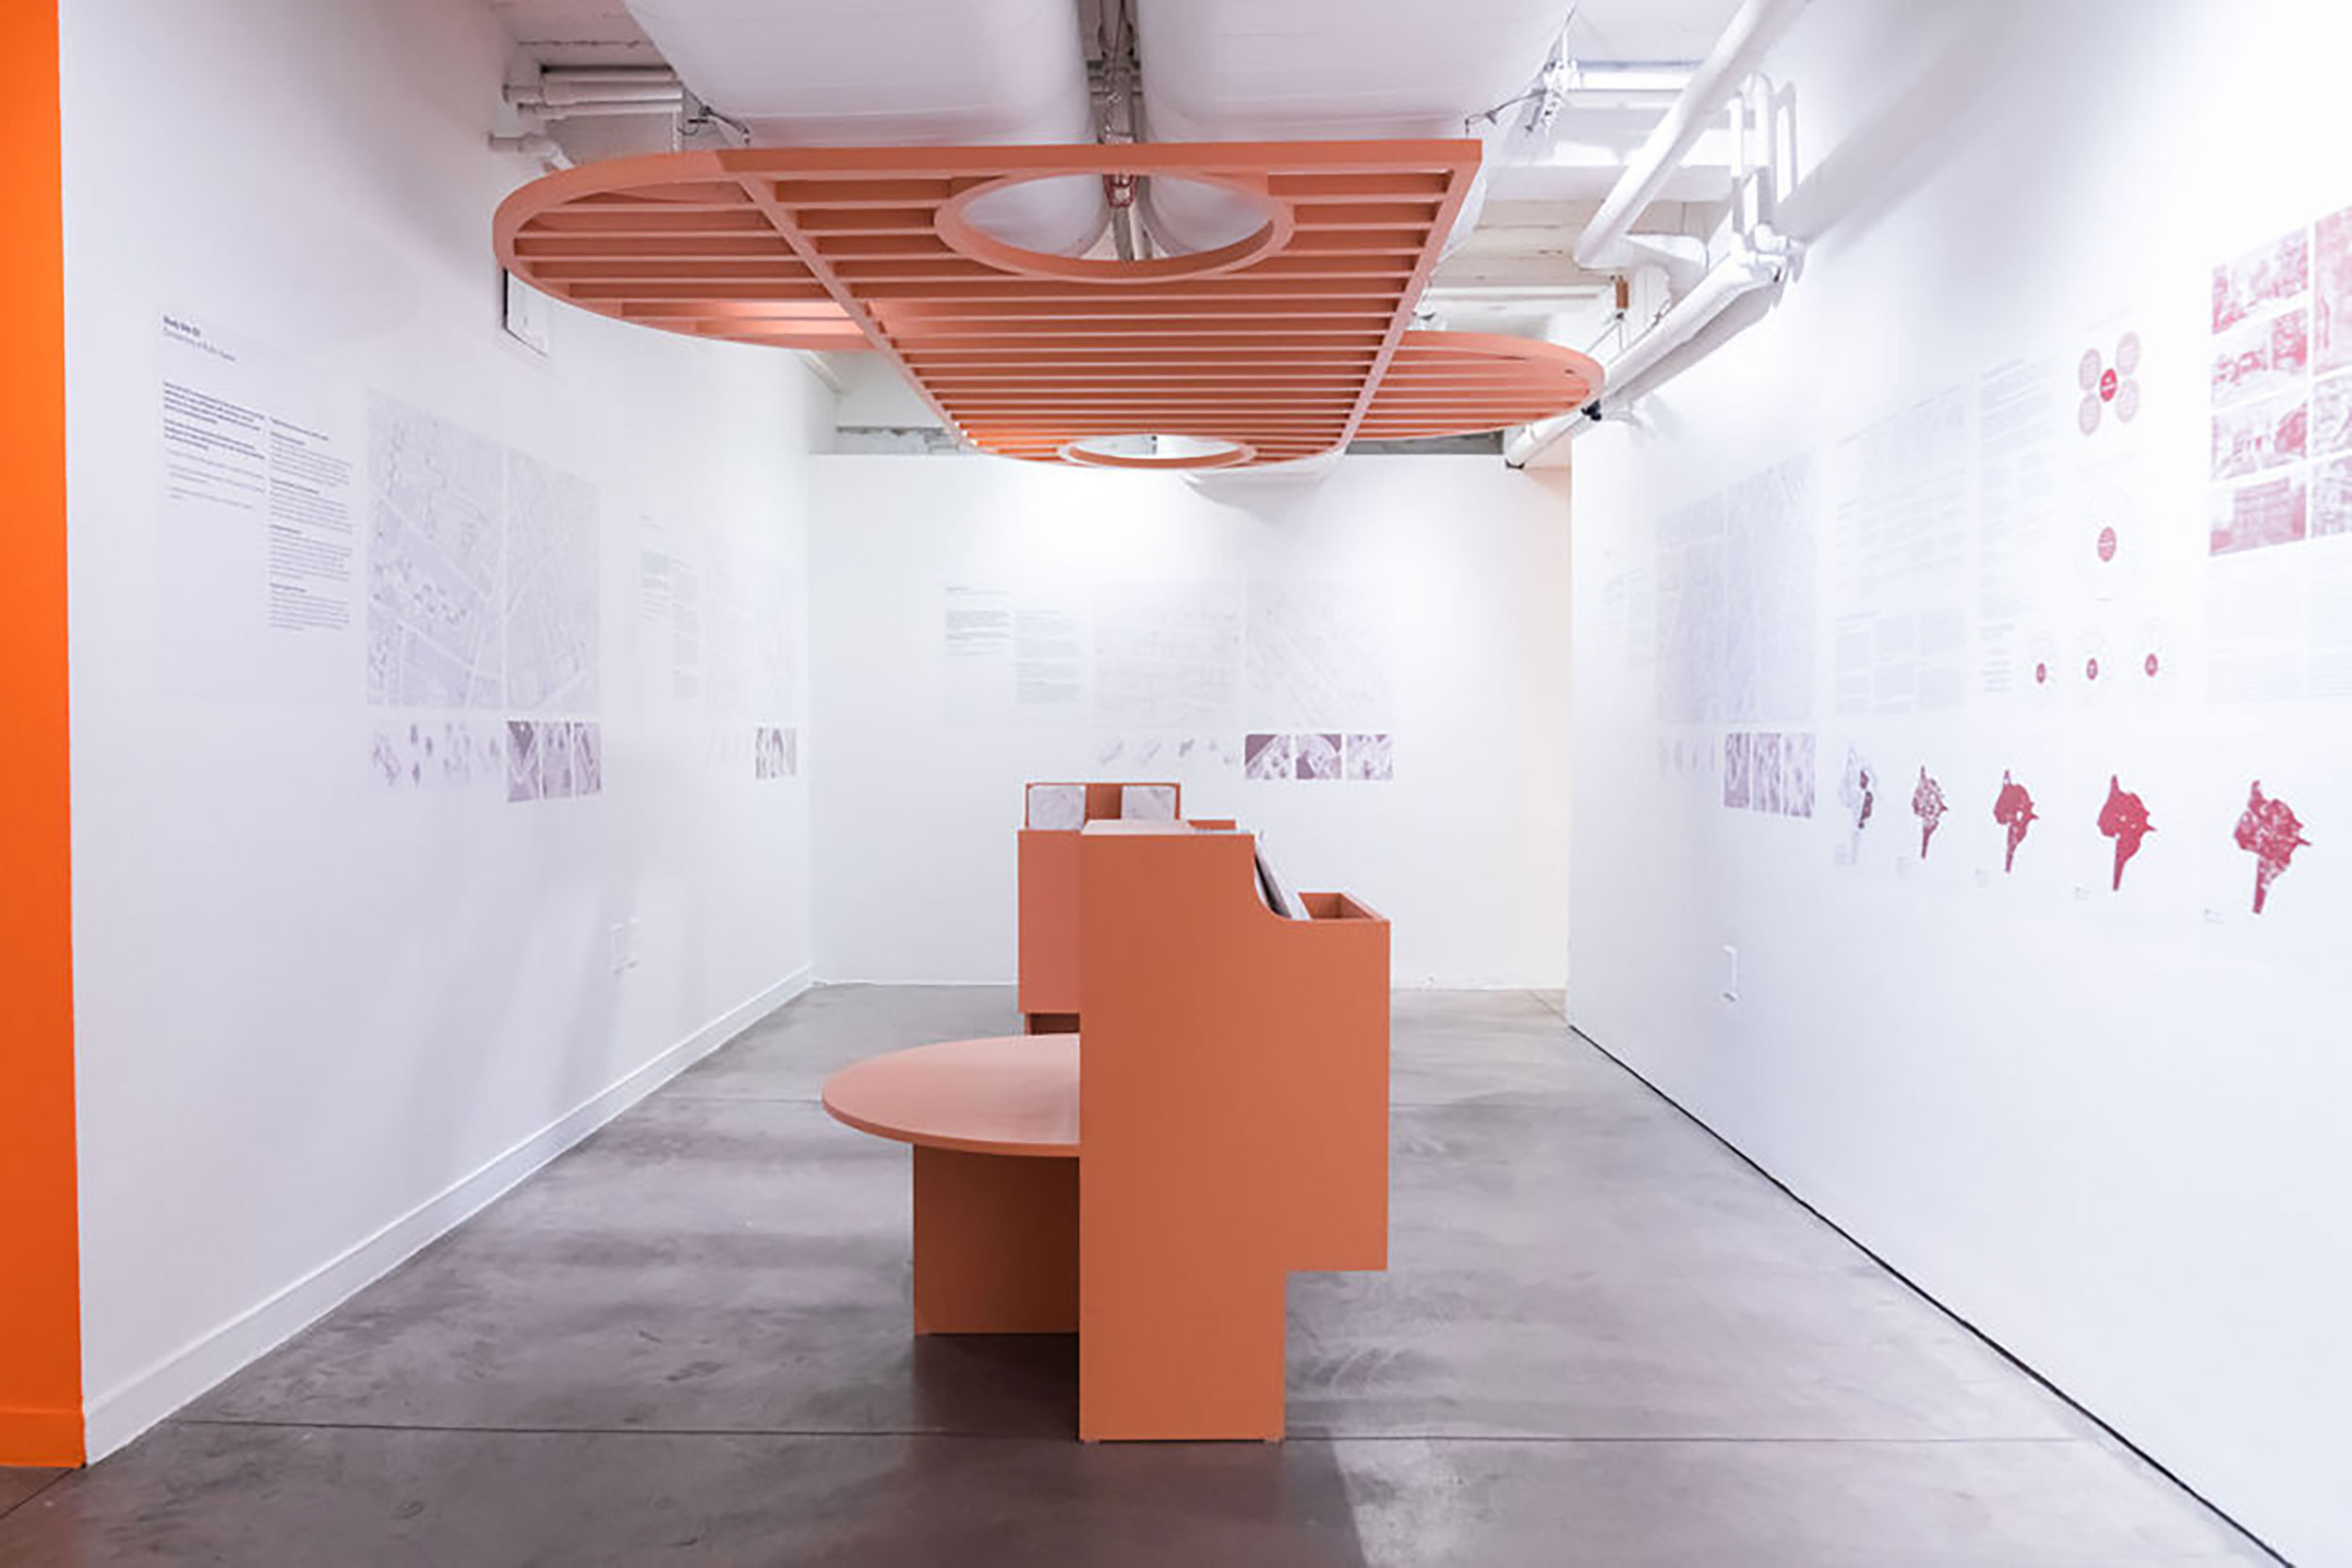 Installation view of a gallery room of white walls with text, a salmon-colored bench in the middle of the room, and a salmon-colored shaded roof above the bench attached to the ceiling.